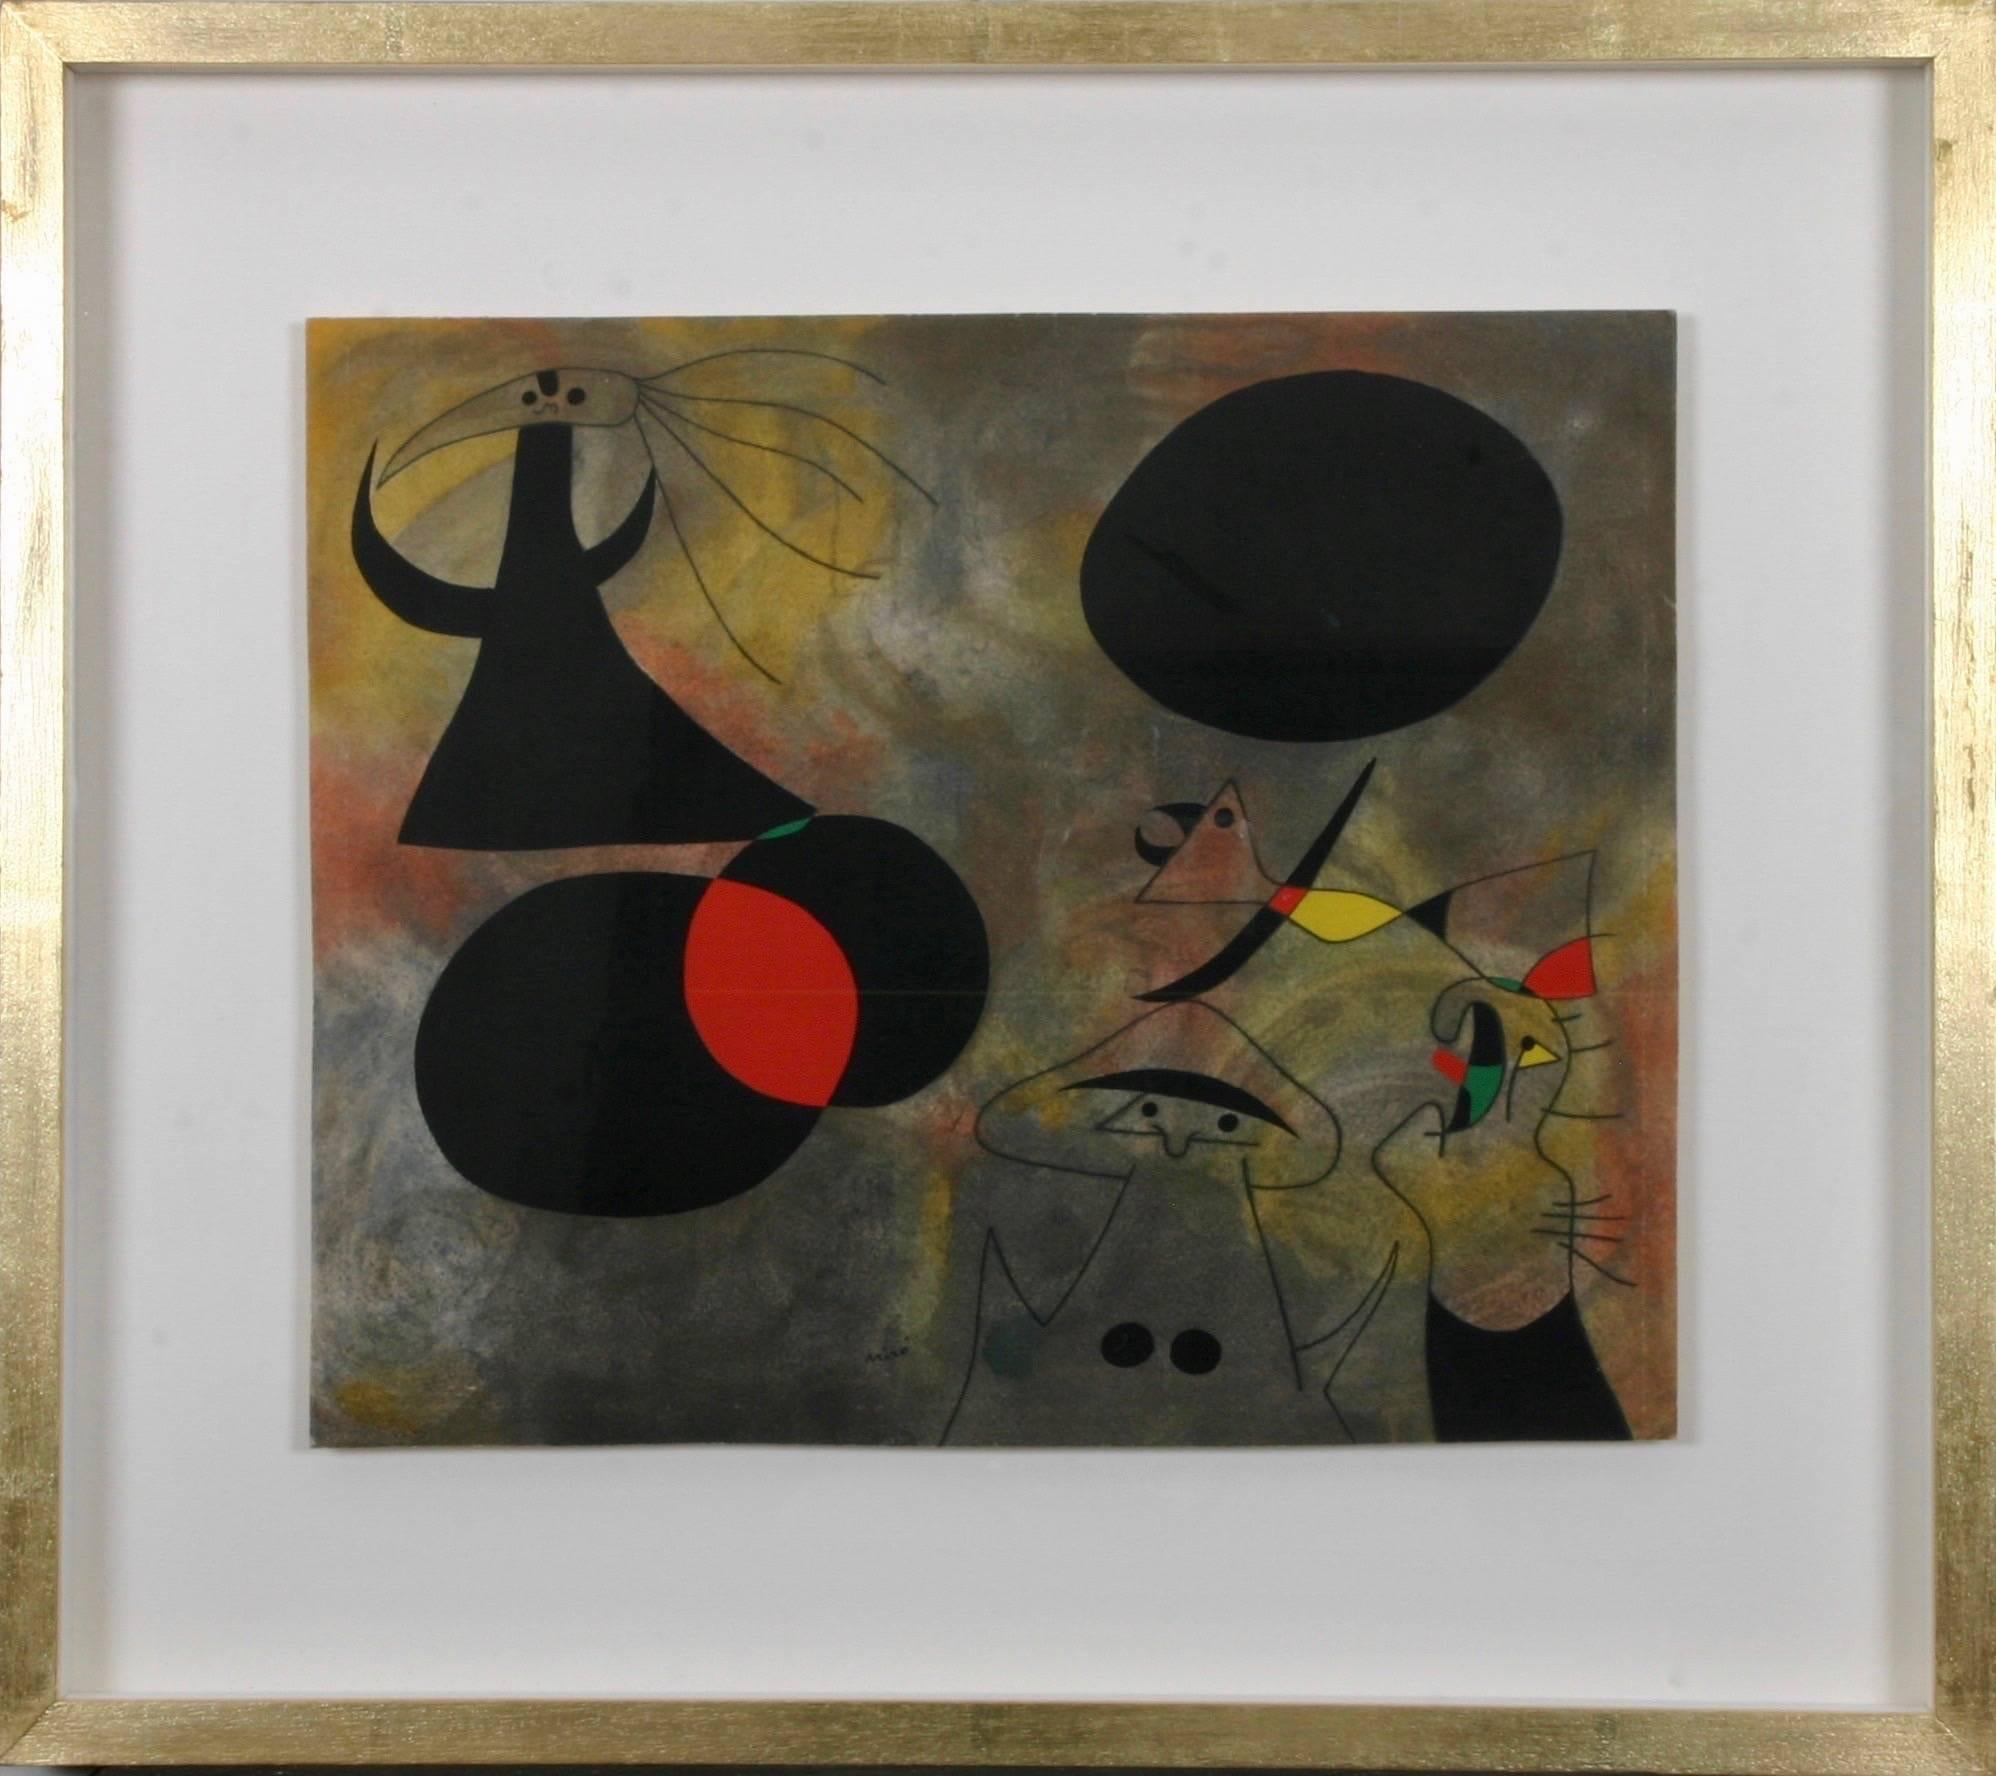 (after) Joan Miró Abstract Print - The Constellations:  Le Lever Du Soleil / Sunrise  (plate I)